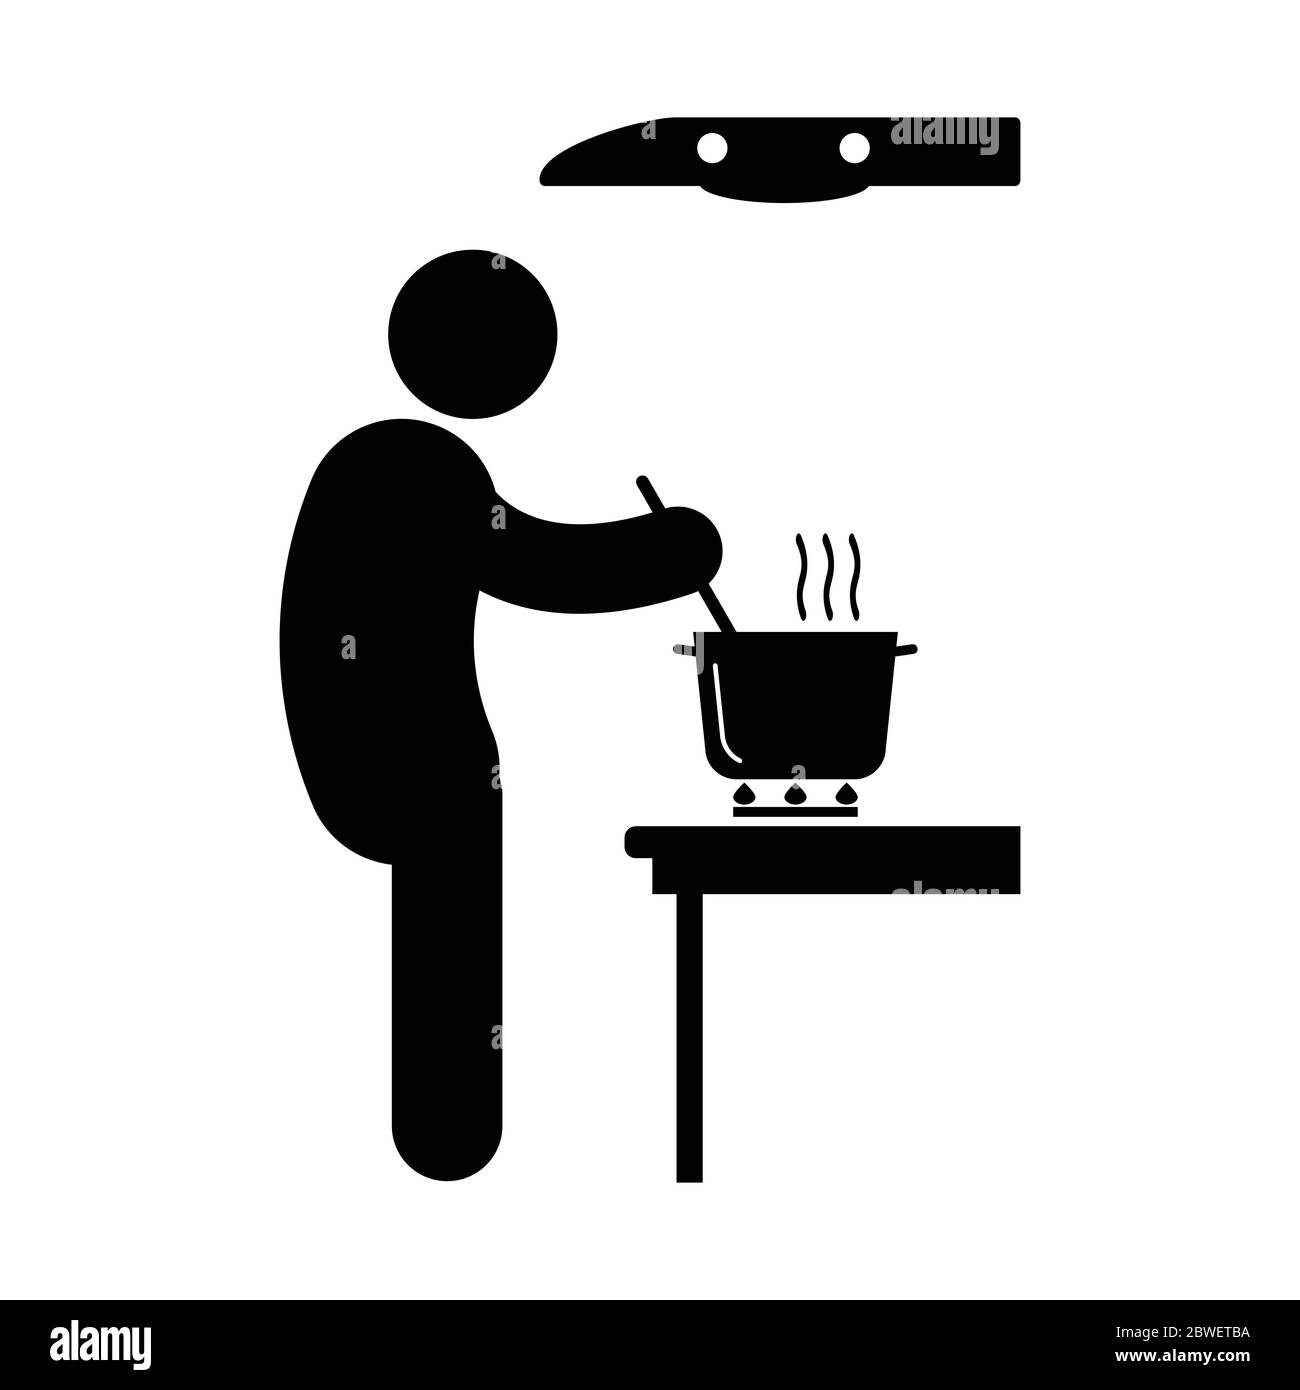 Cooking Over Stove Stick Figure. Black and white pictogram depicting man cooking over in pot over fire stove with vent on top. Vector File Stock Vector